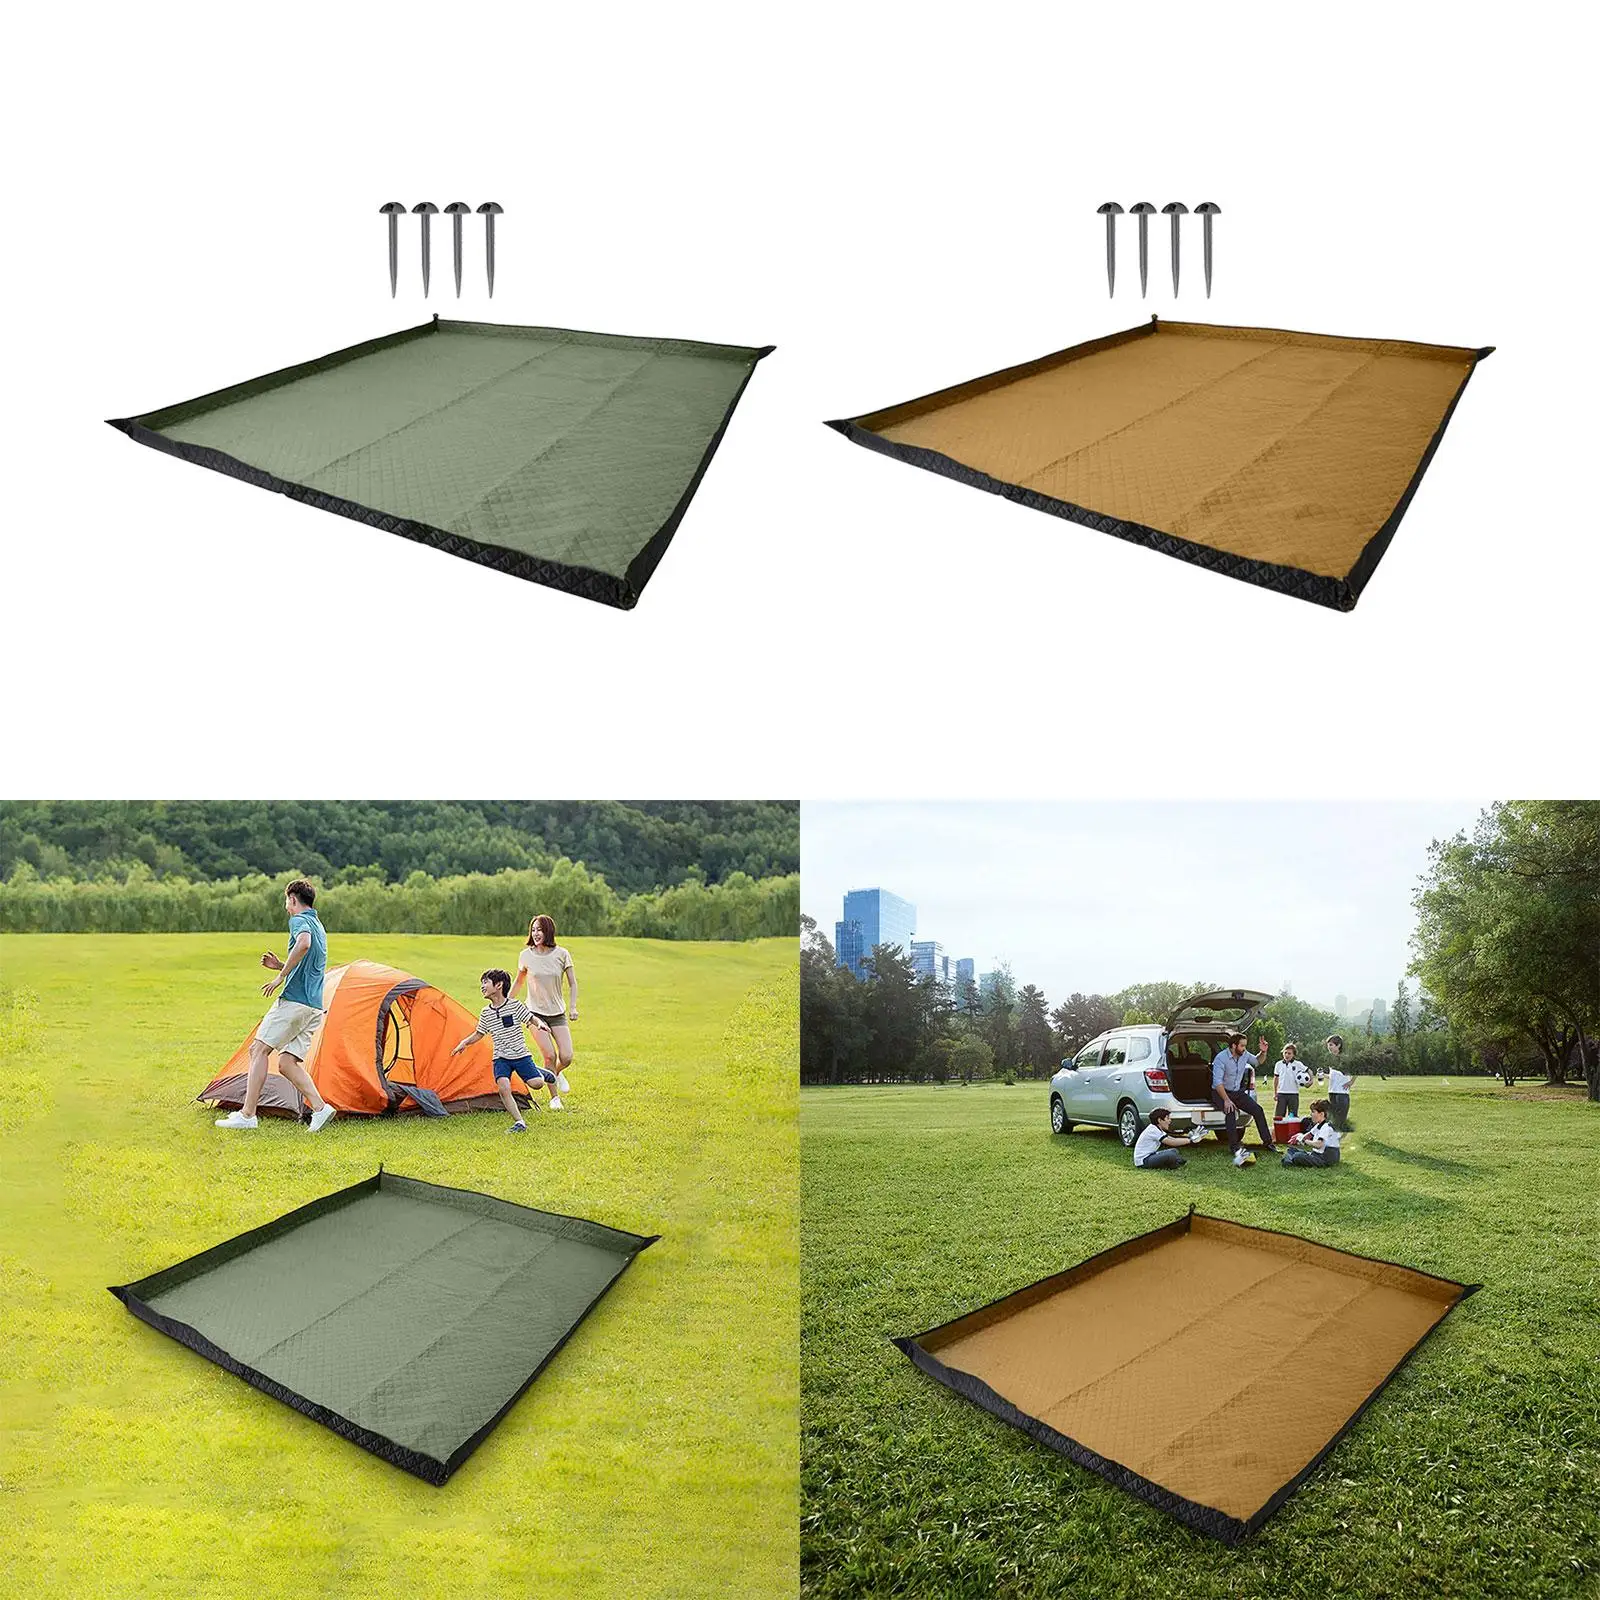 Tent Pad 200cmx200cm with 4 Nails Rug Foldable Portable Moistureproof Camping Blanket for Family Party Camping Concerts Outdoor